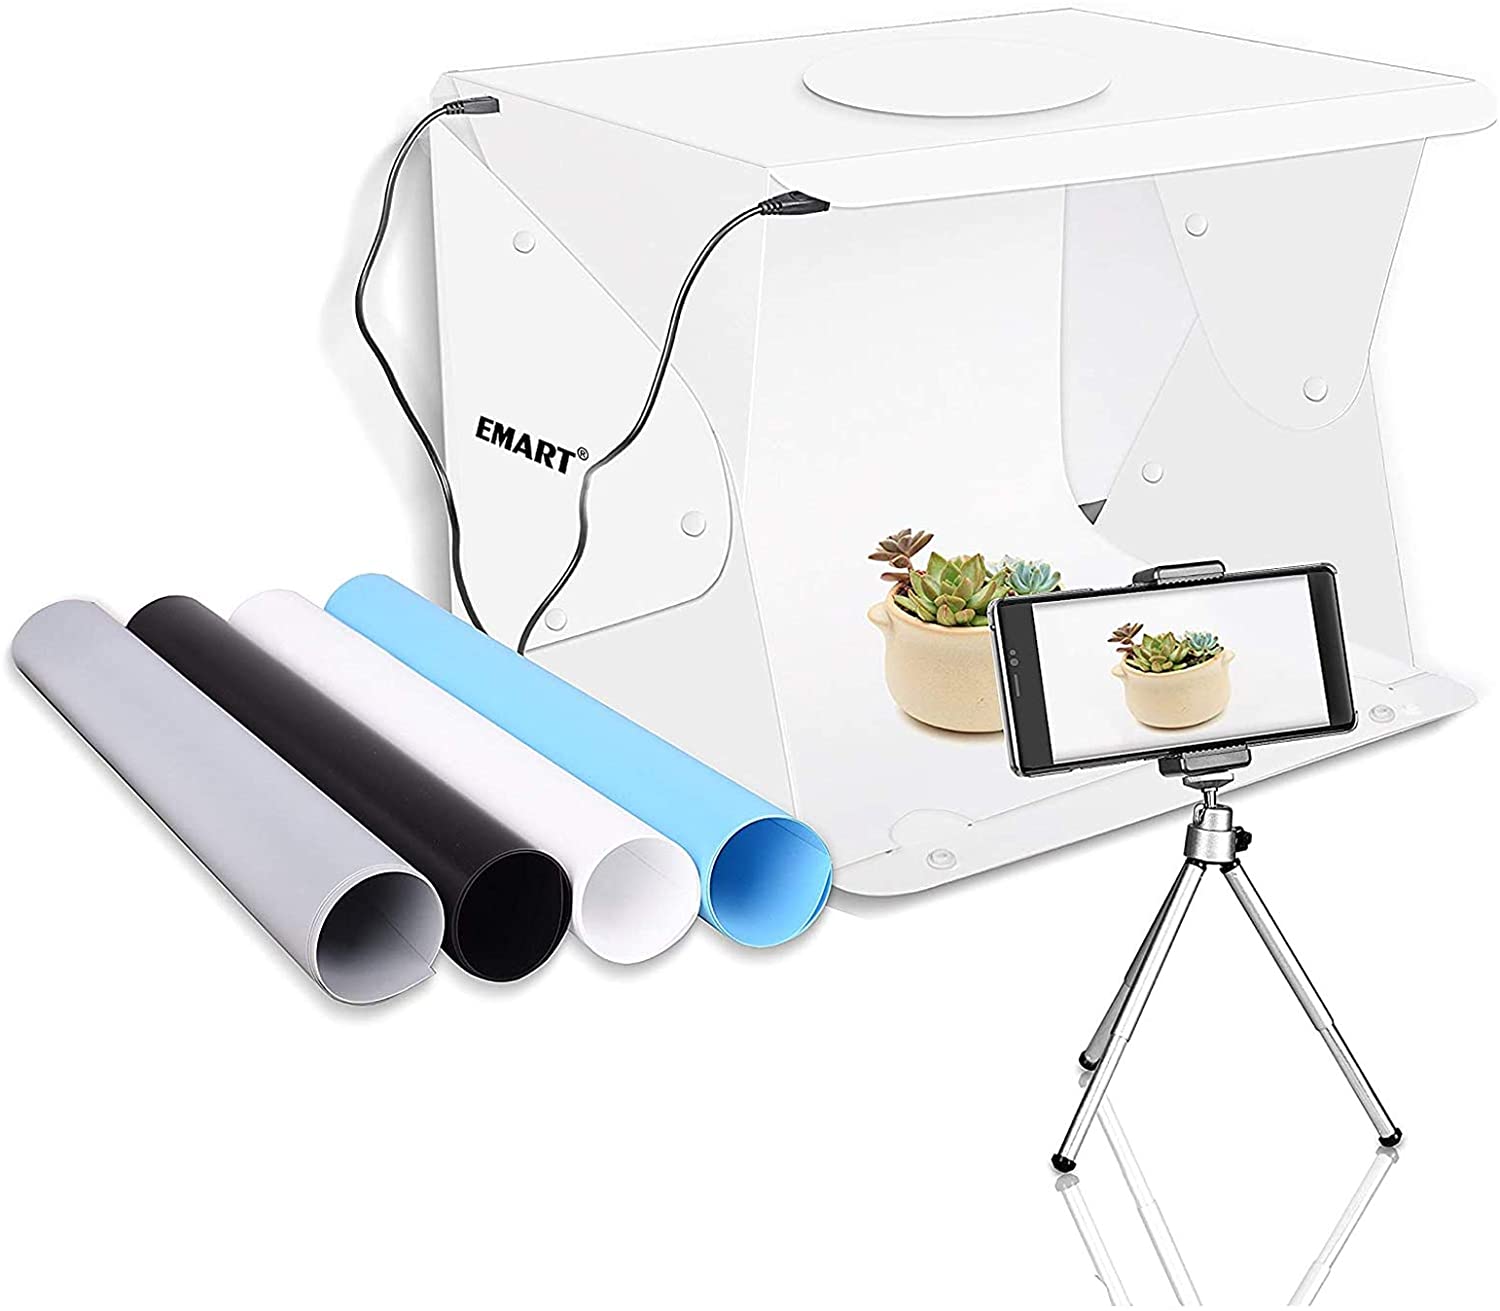 1. Emart Photography Table Top Light Box